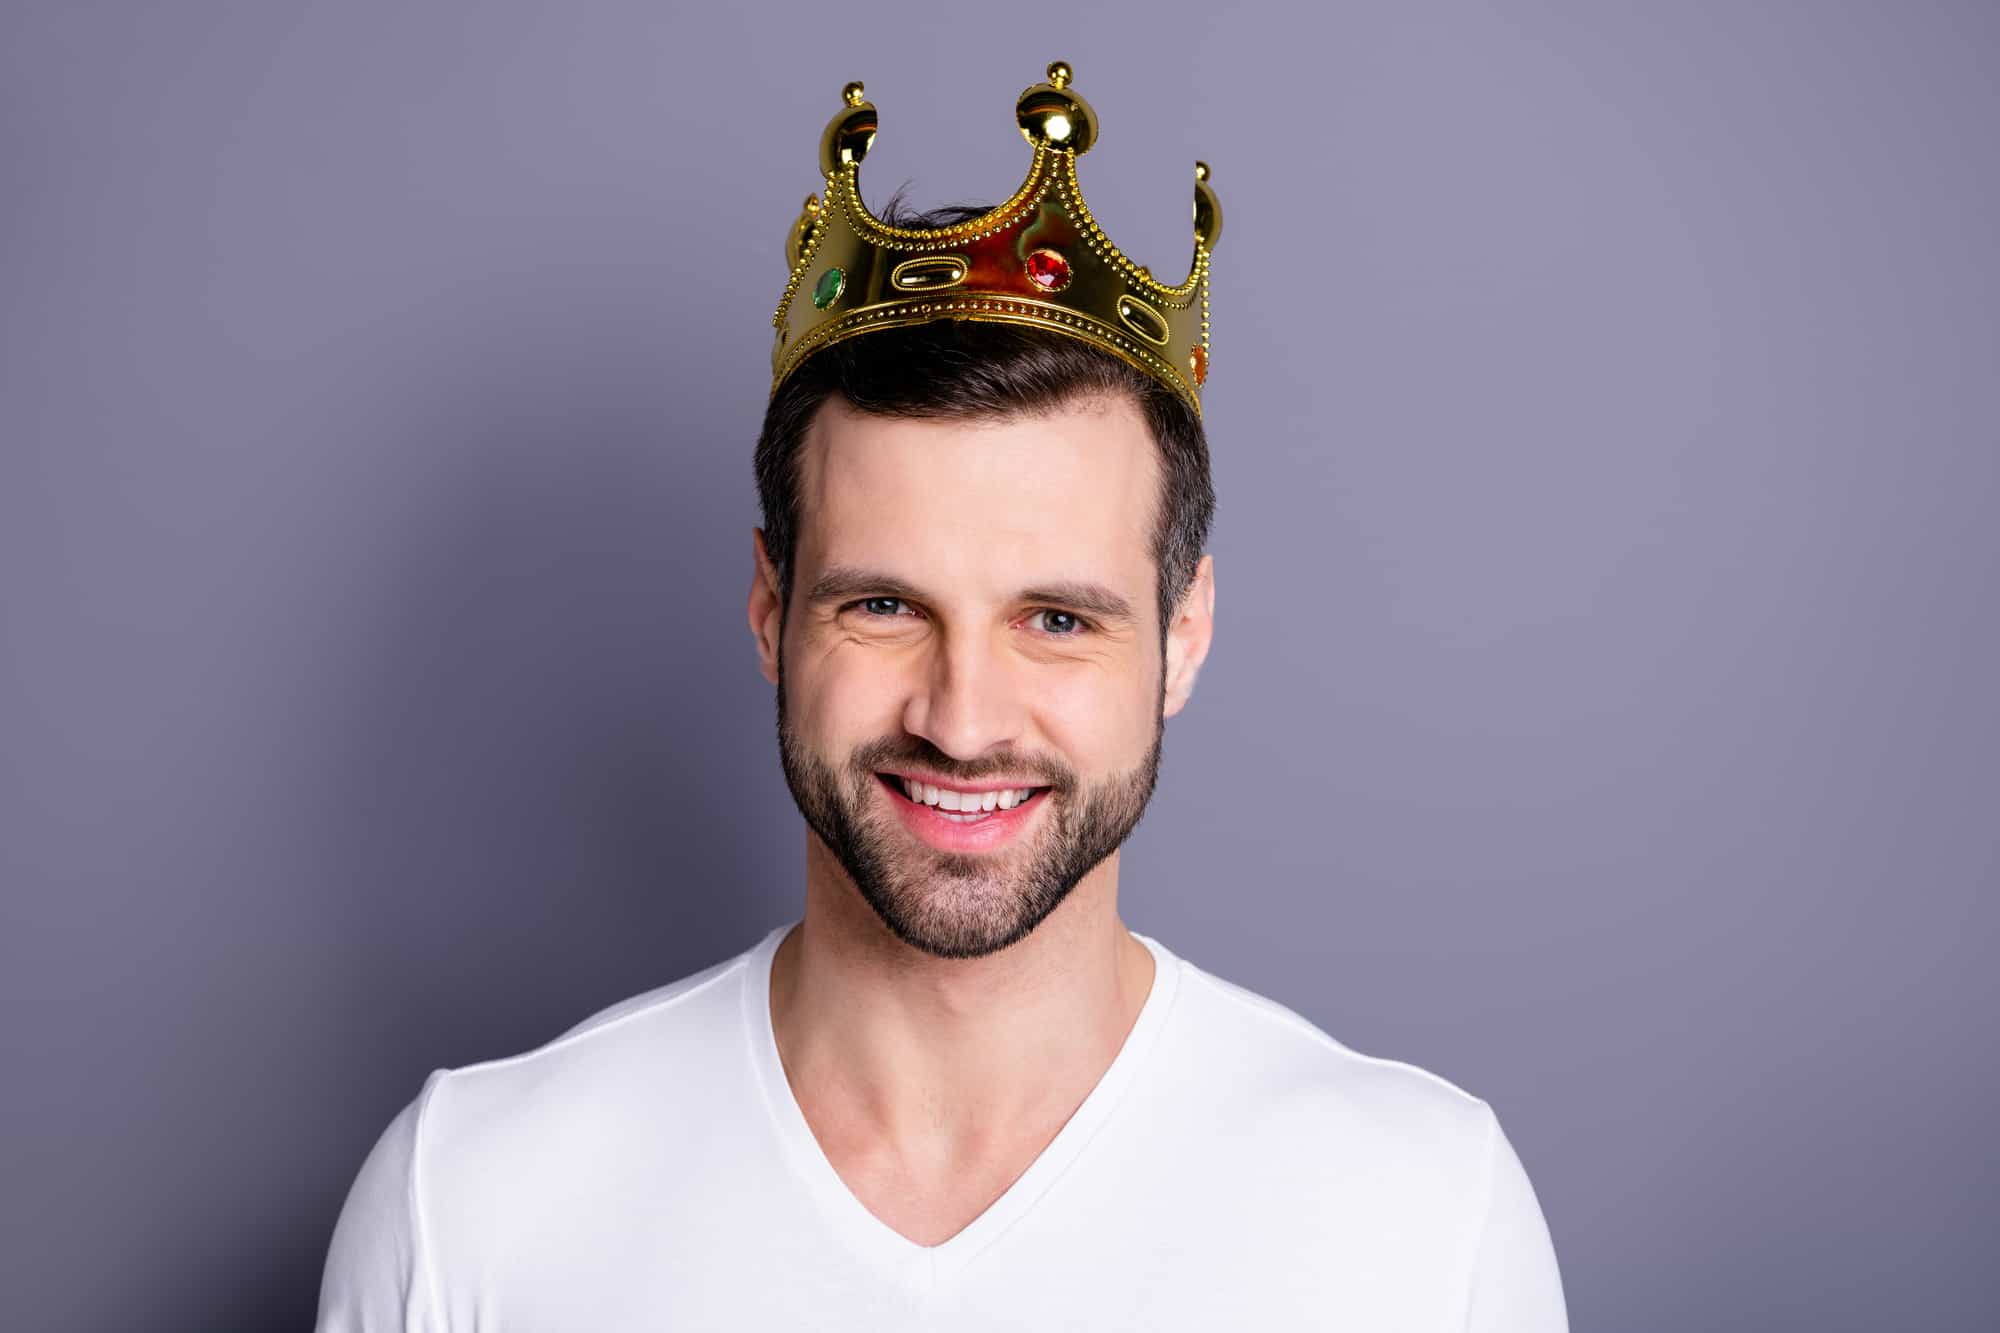 How to treat a man like a King (All you need to know)